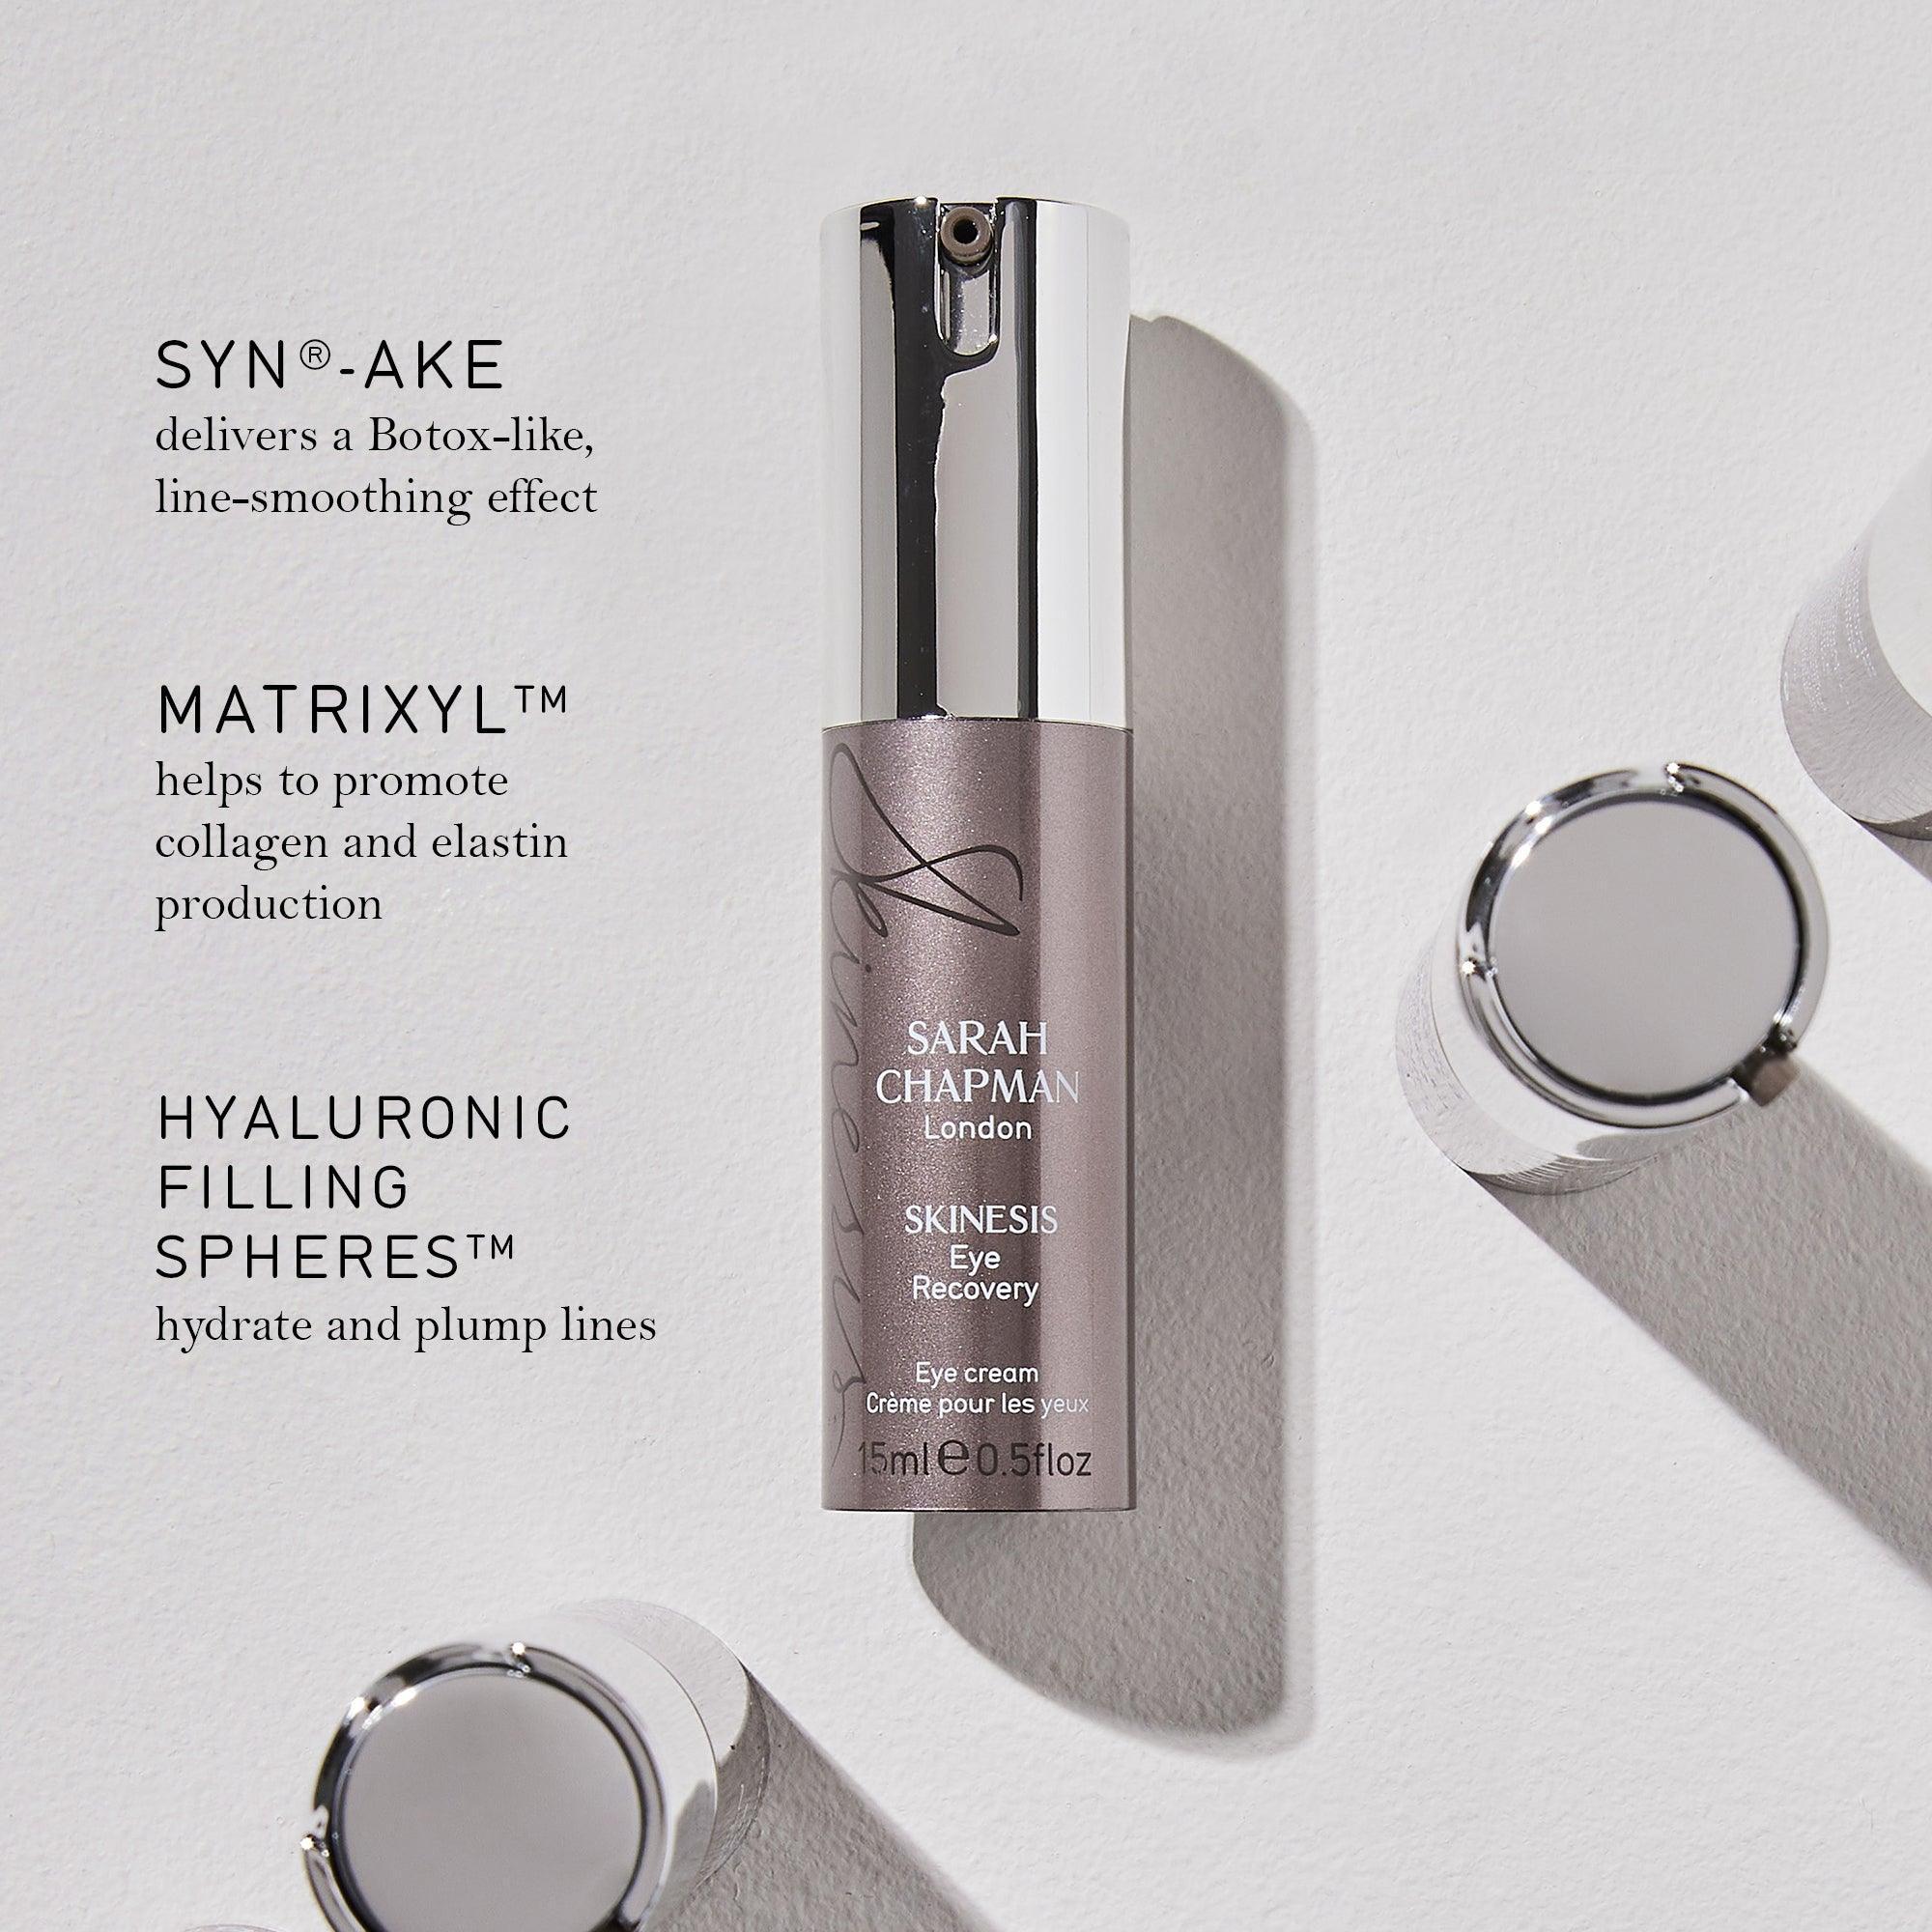 Sarah Chapman Skinesis Eye Recovery Key Ingredients to hydrate and plump lines